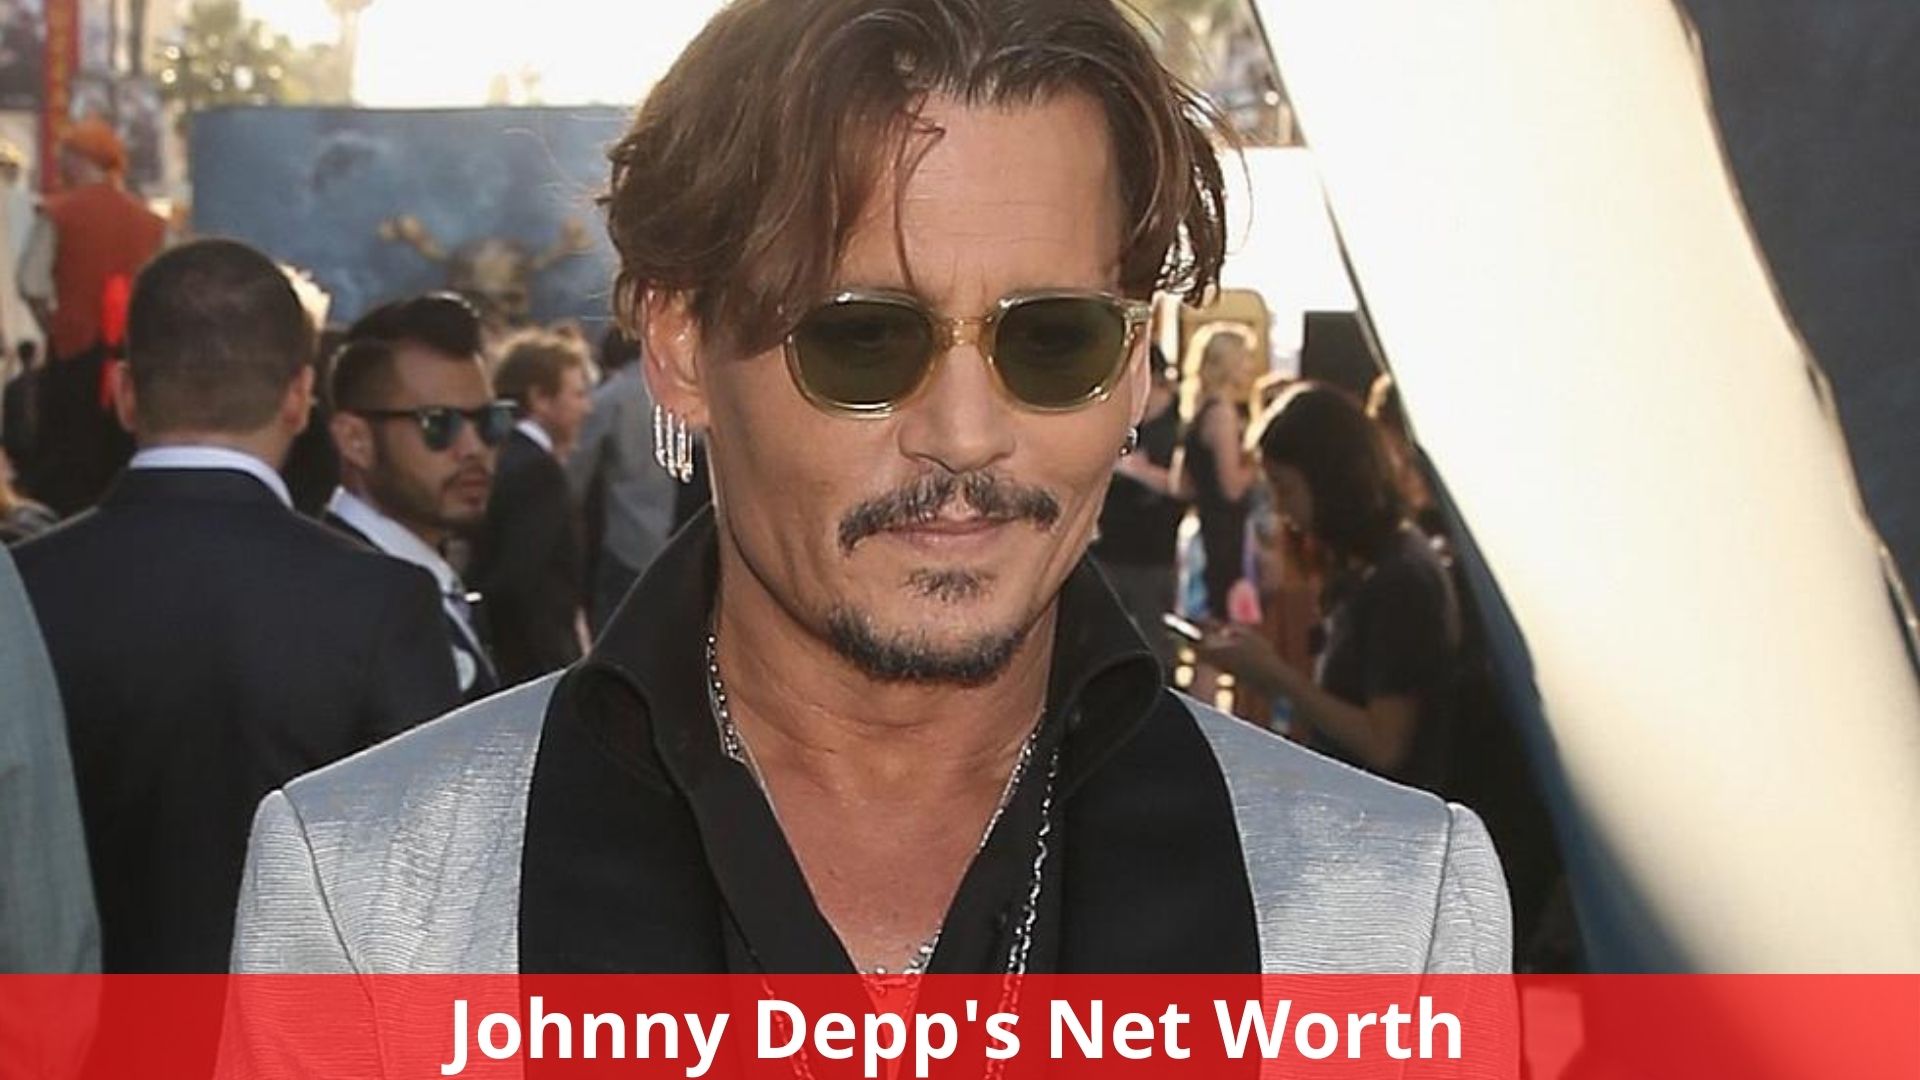 Johnny Depp's Net Worth, Early Life, Career, And More!